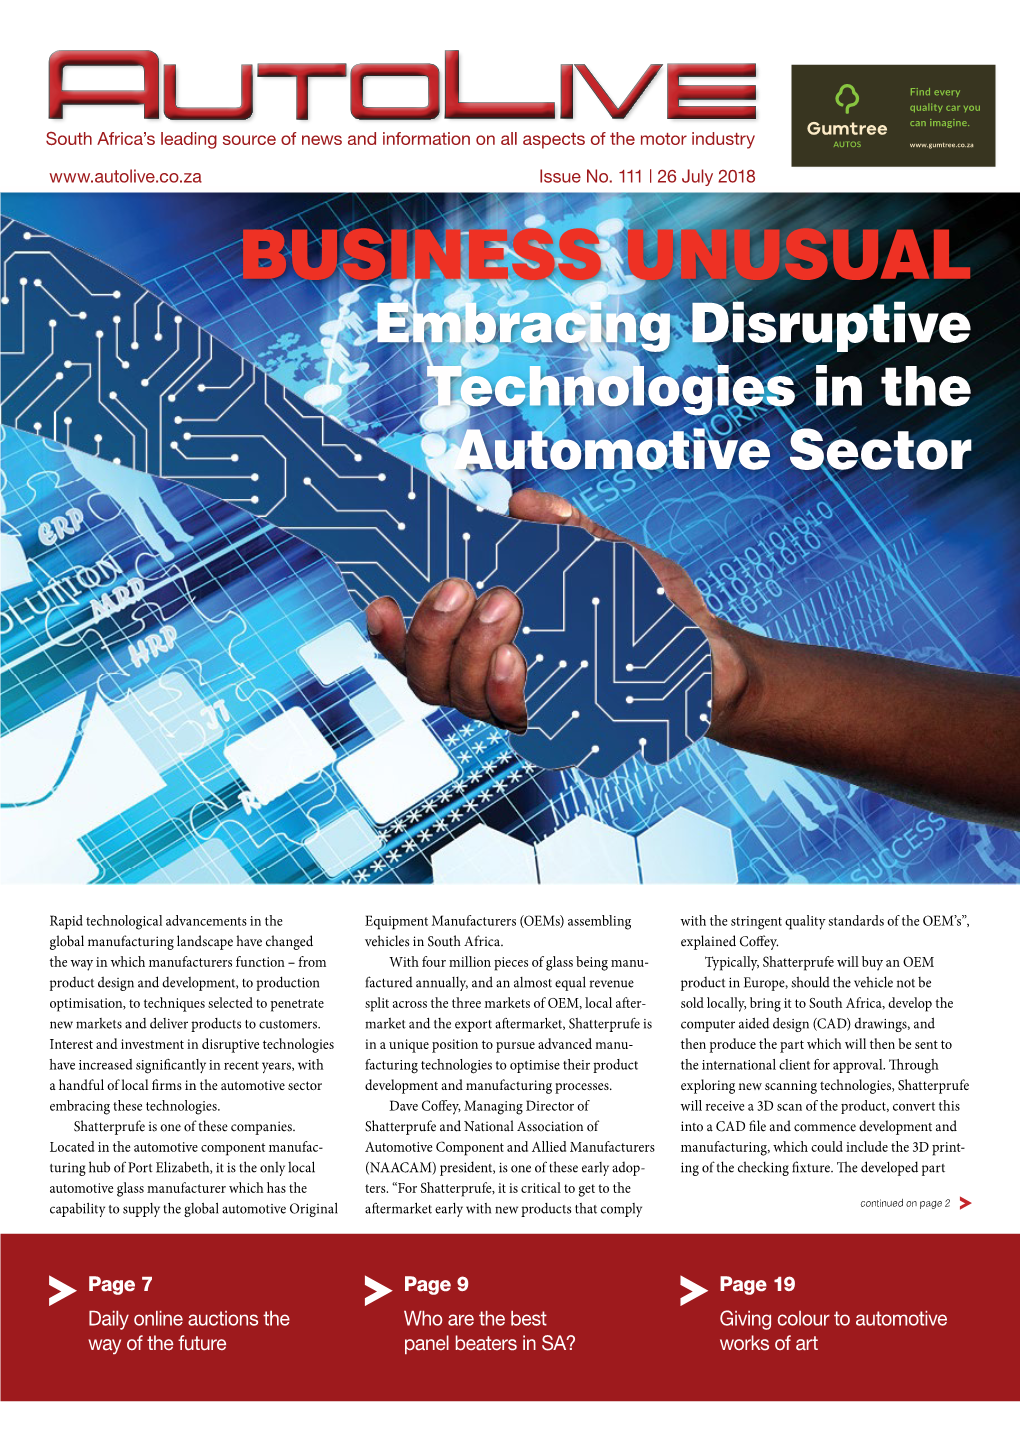 BUSINESS UNUSUAL Embracing Disruptive Technologies in the Automotive Sector